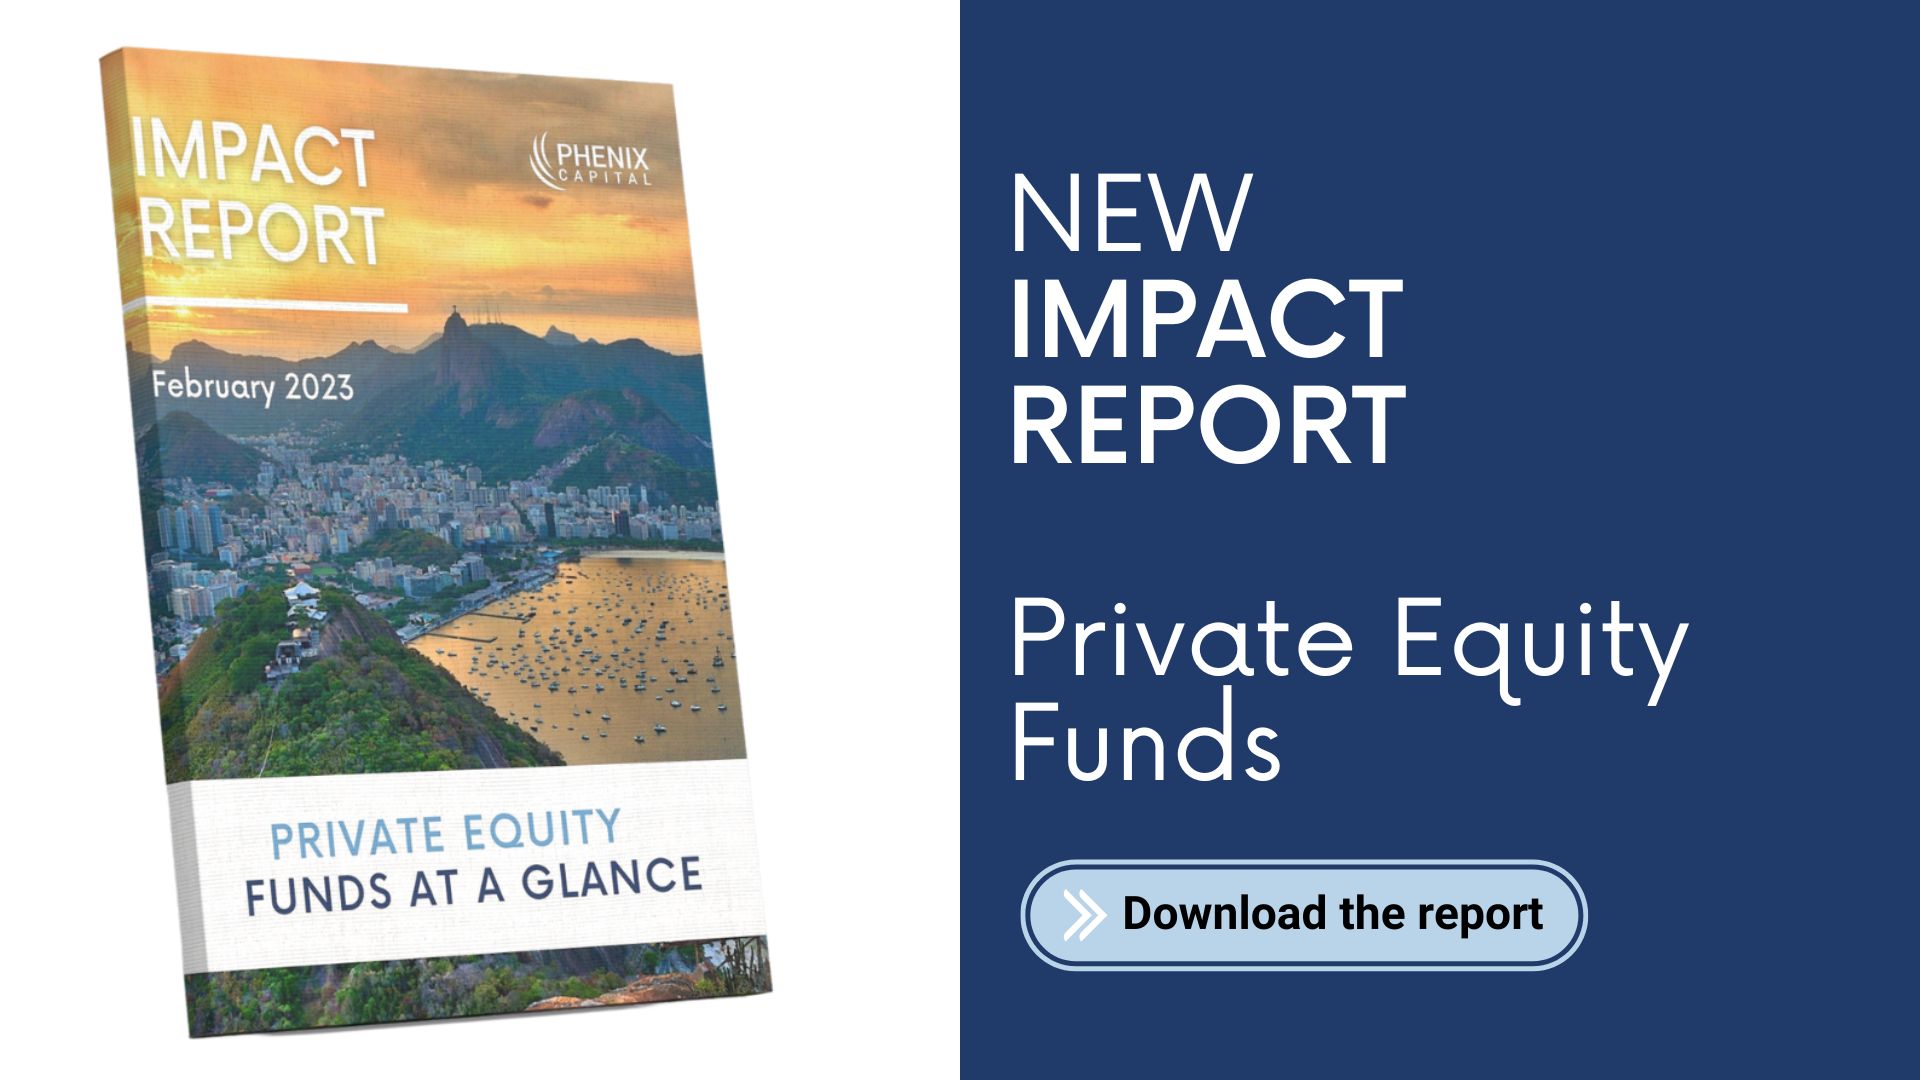 PRESS RELEASE: Private equity impact funds universe has grown by 63% since 2015